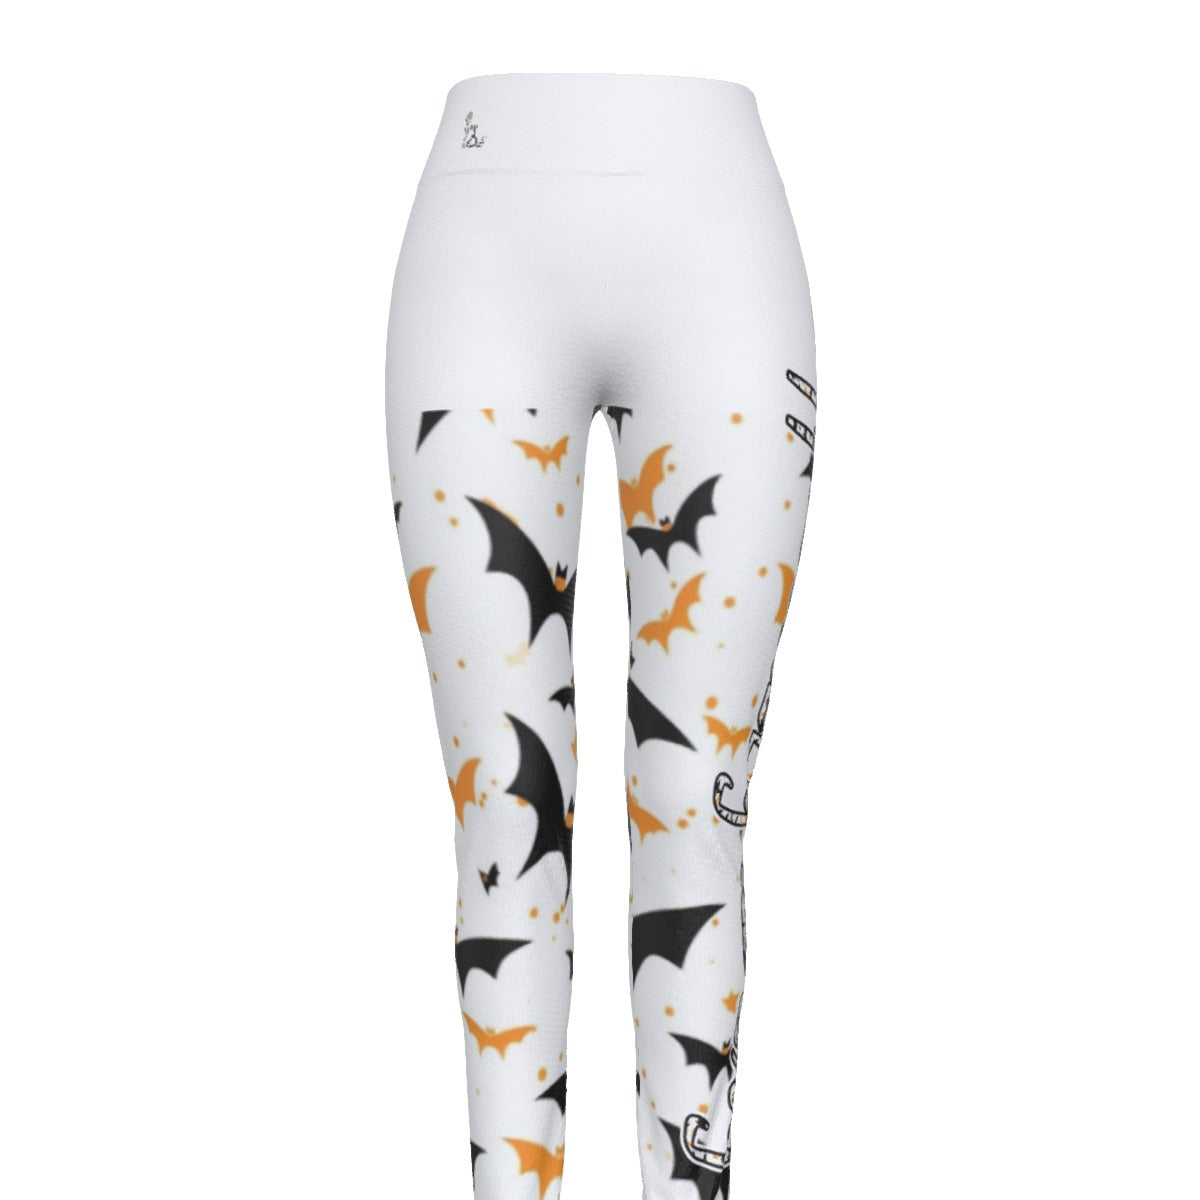 Officially Sexy Halloween Collection Black and Orange Bats Women's White High Waist Booty Popper Leggings #2 (English) 1